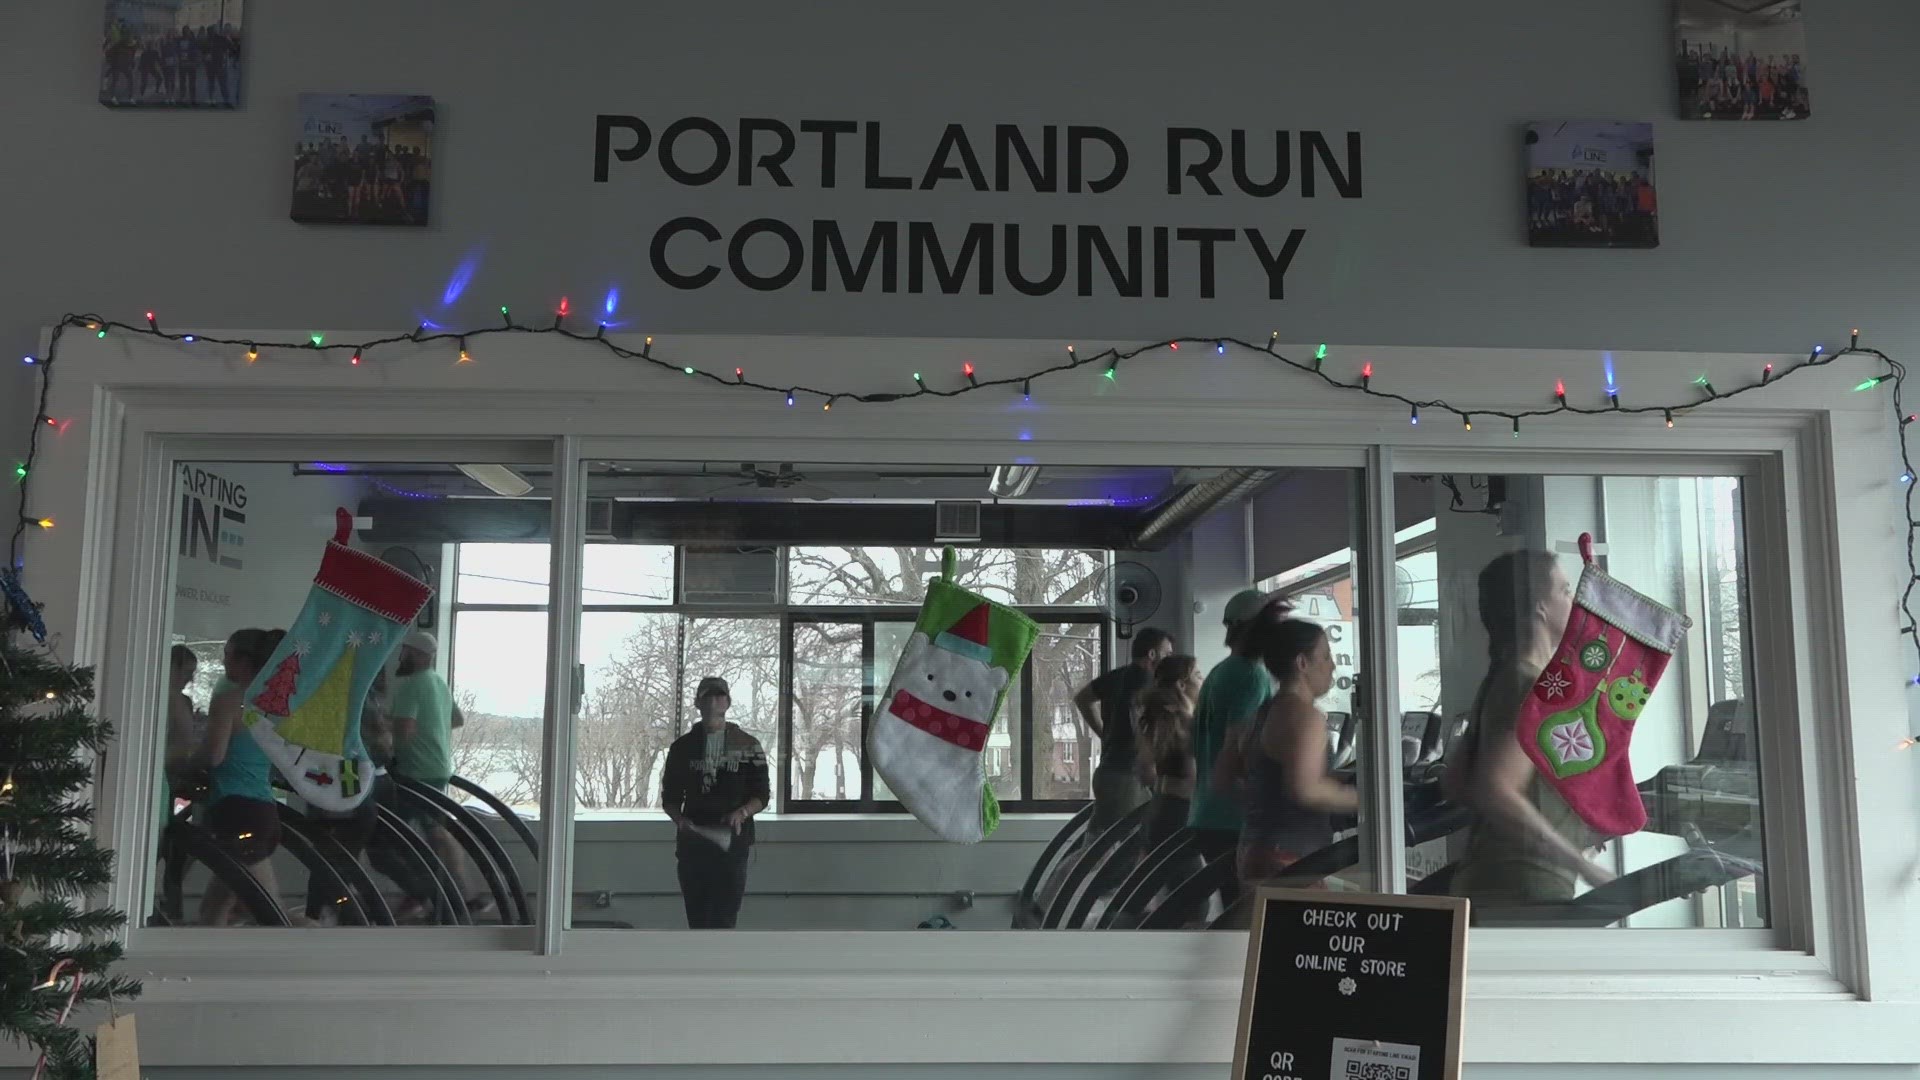 Starting Line is donating one dollar for every mile logged on the treadmills throughout the day to nonprofit Maine Needs.